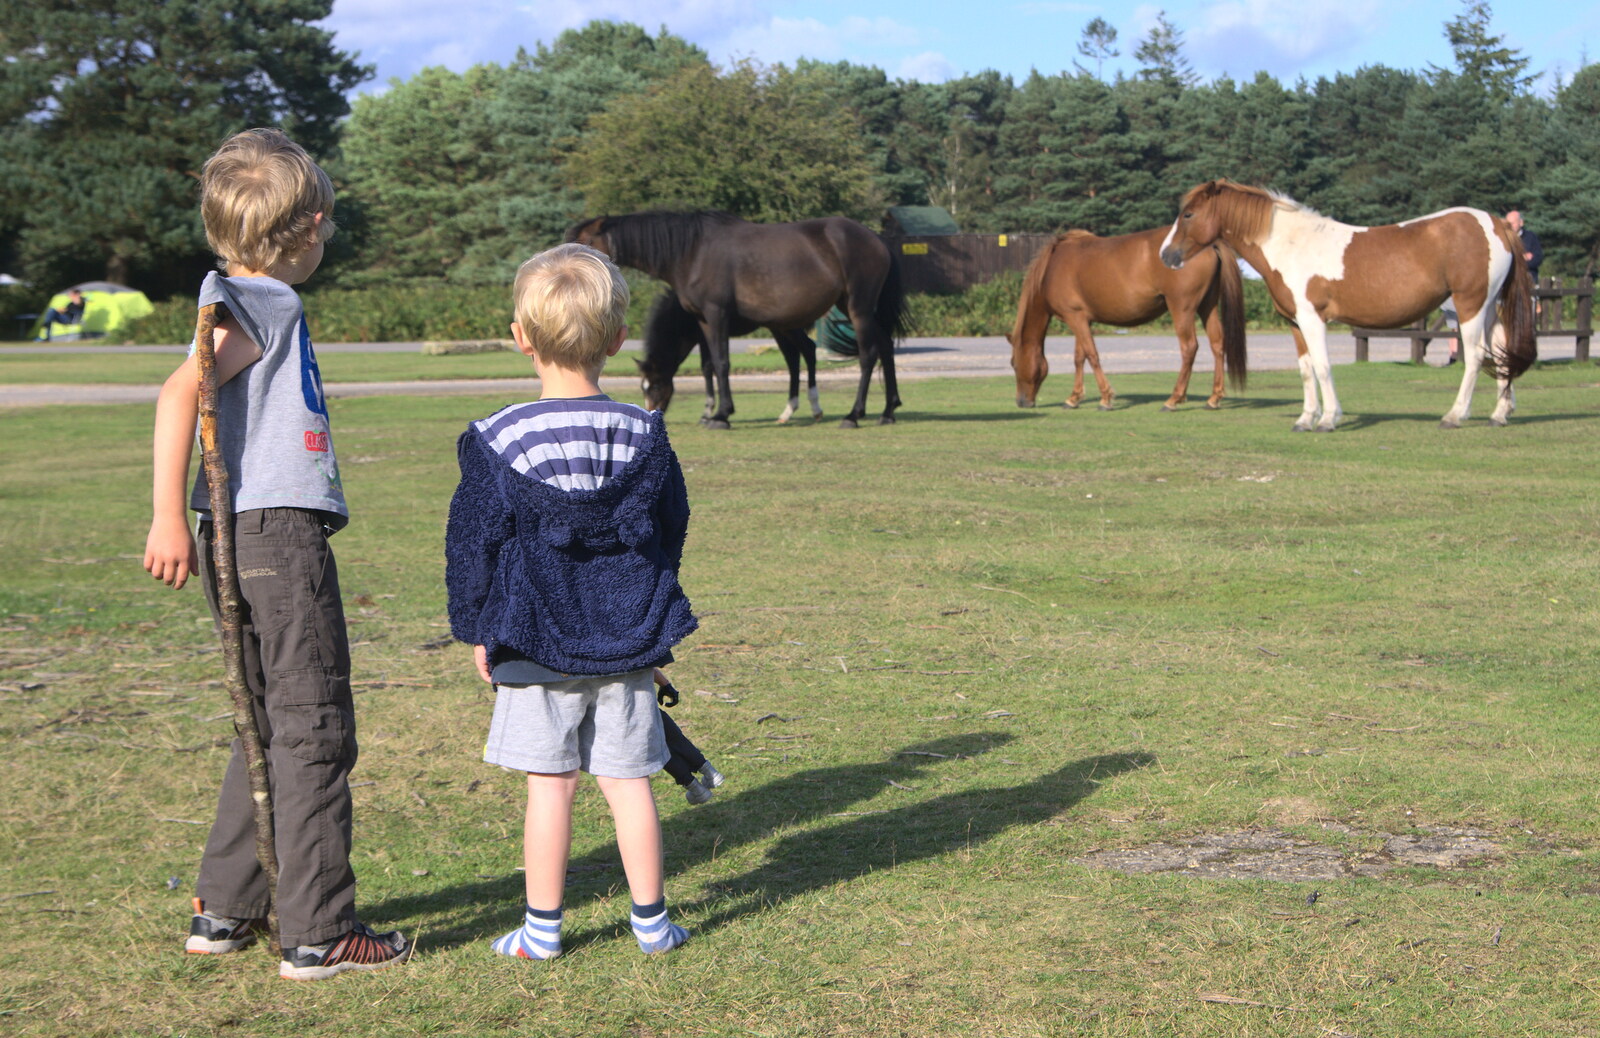 The boys look at the ponies from Camping at Roundhills, Brockenhurst, New Forest, Hampshire - 29th August 2015